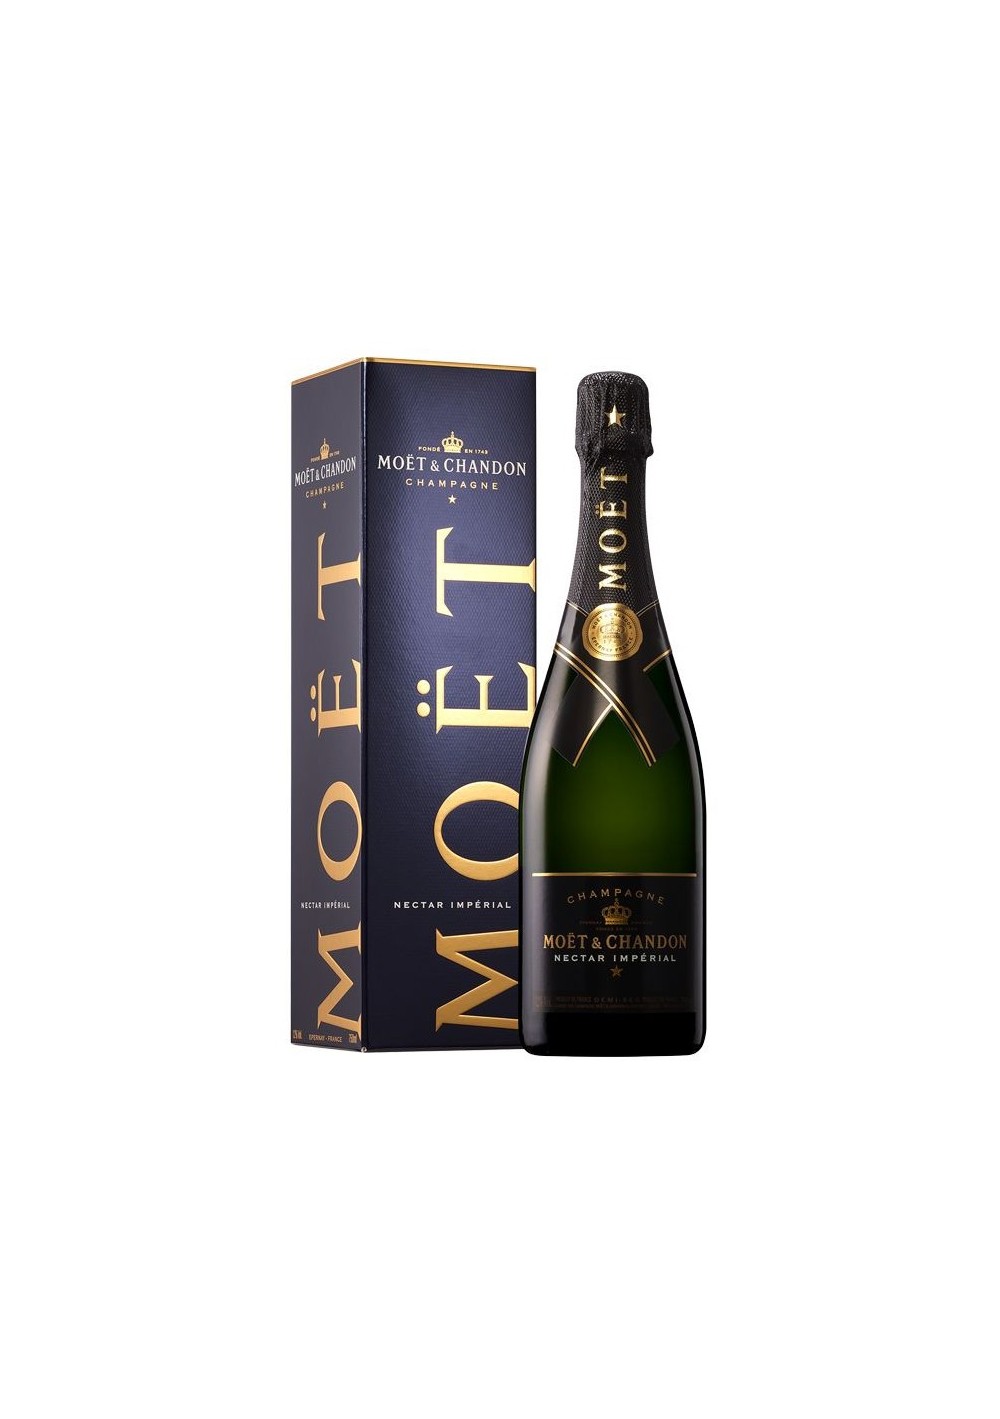 Champagne Moët & Chandon Nectar Imperial